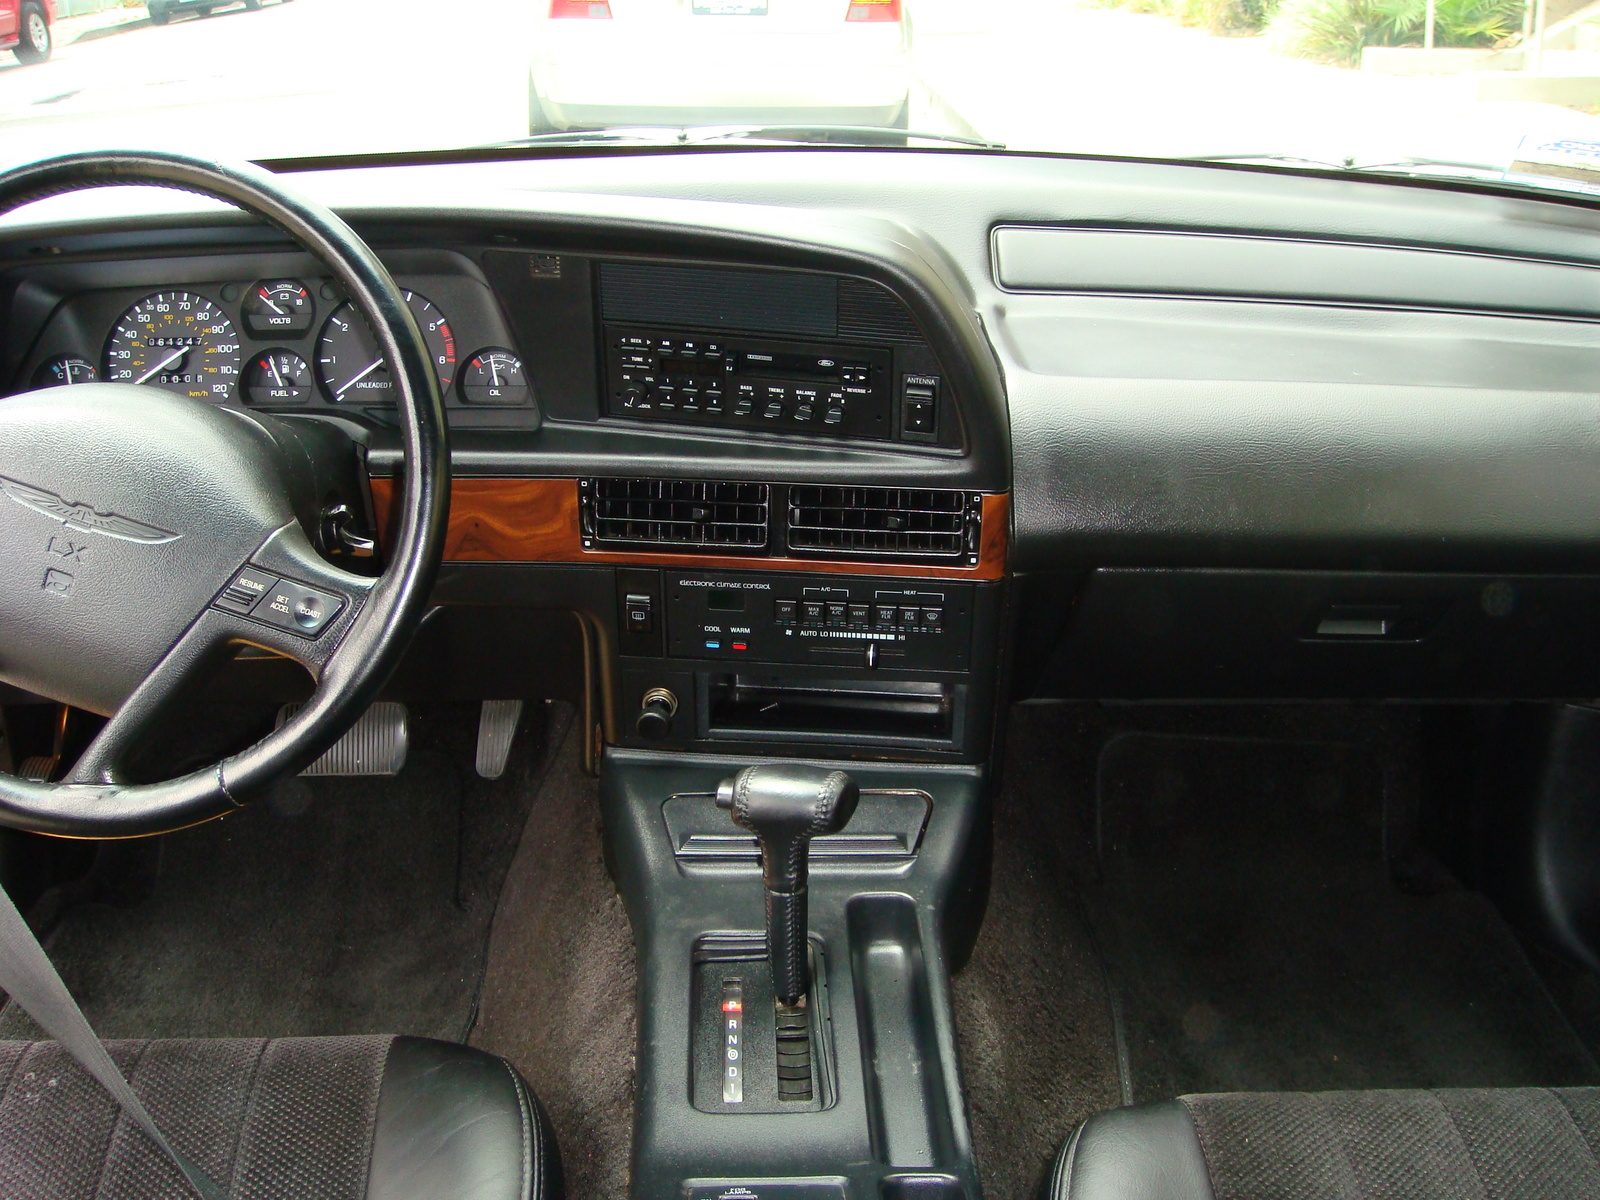 1993 Ford thunderbird lx coupe specs #1